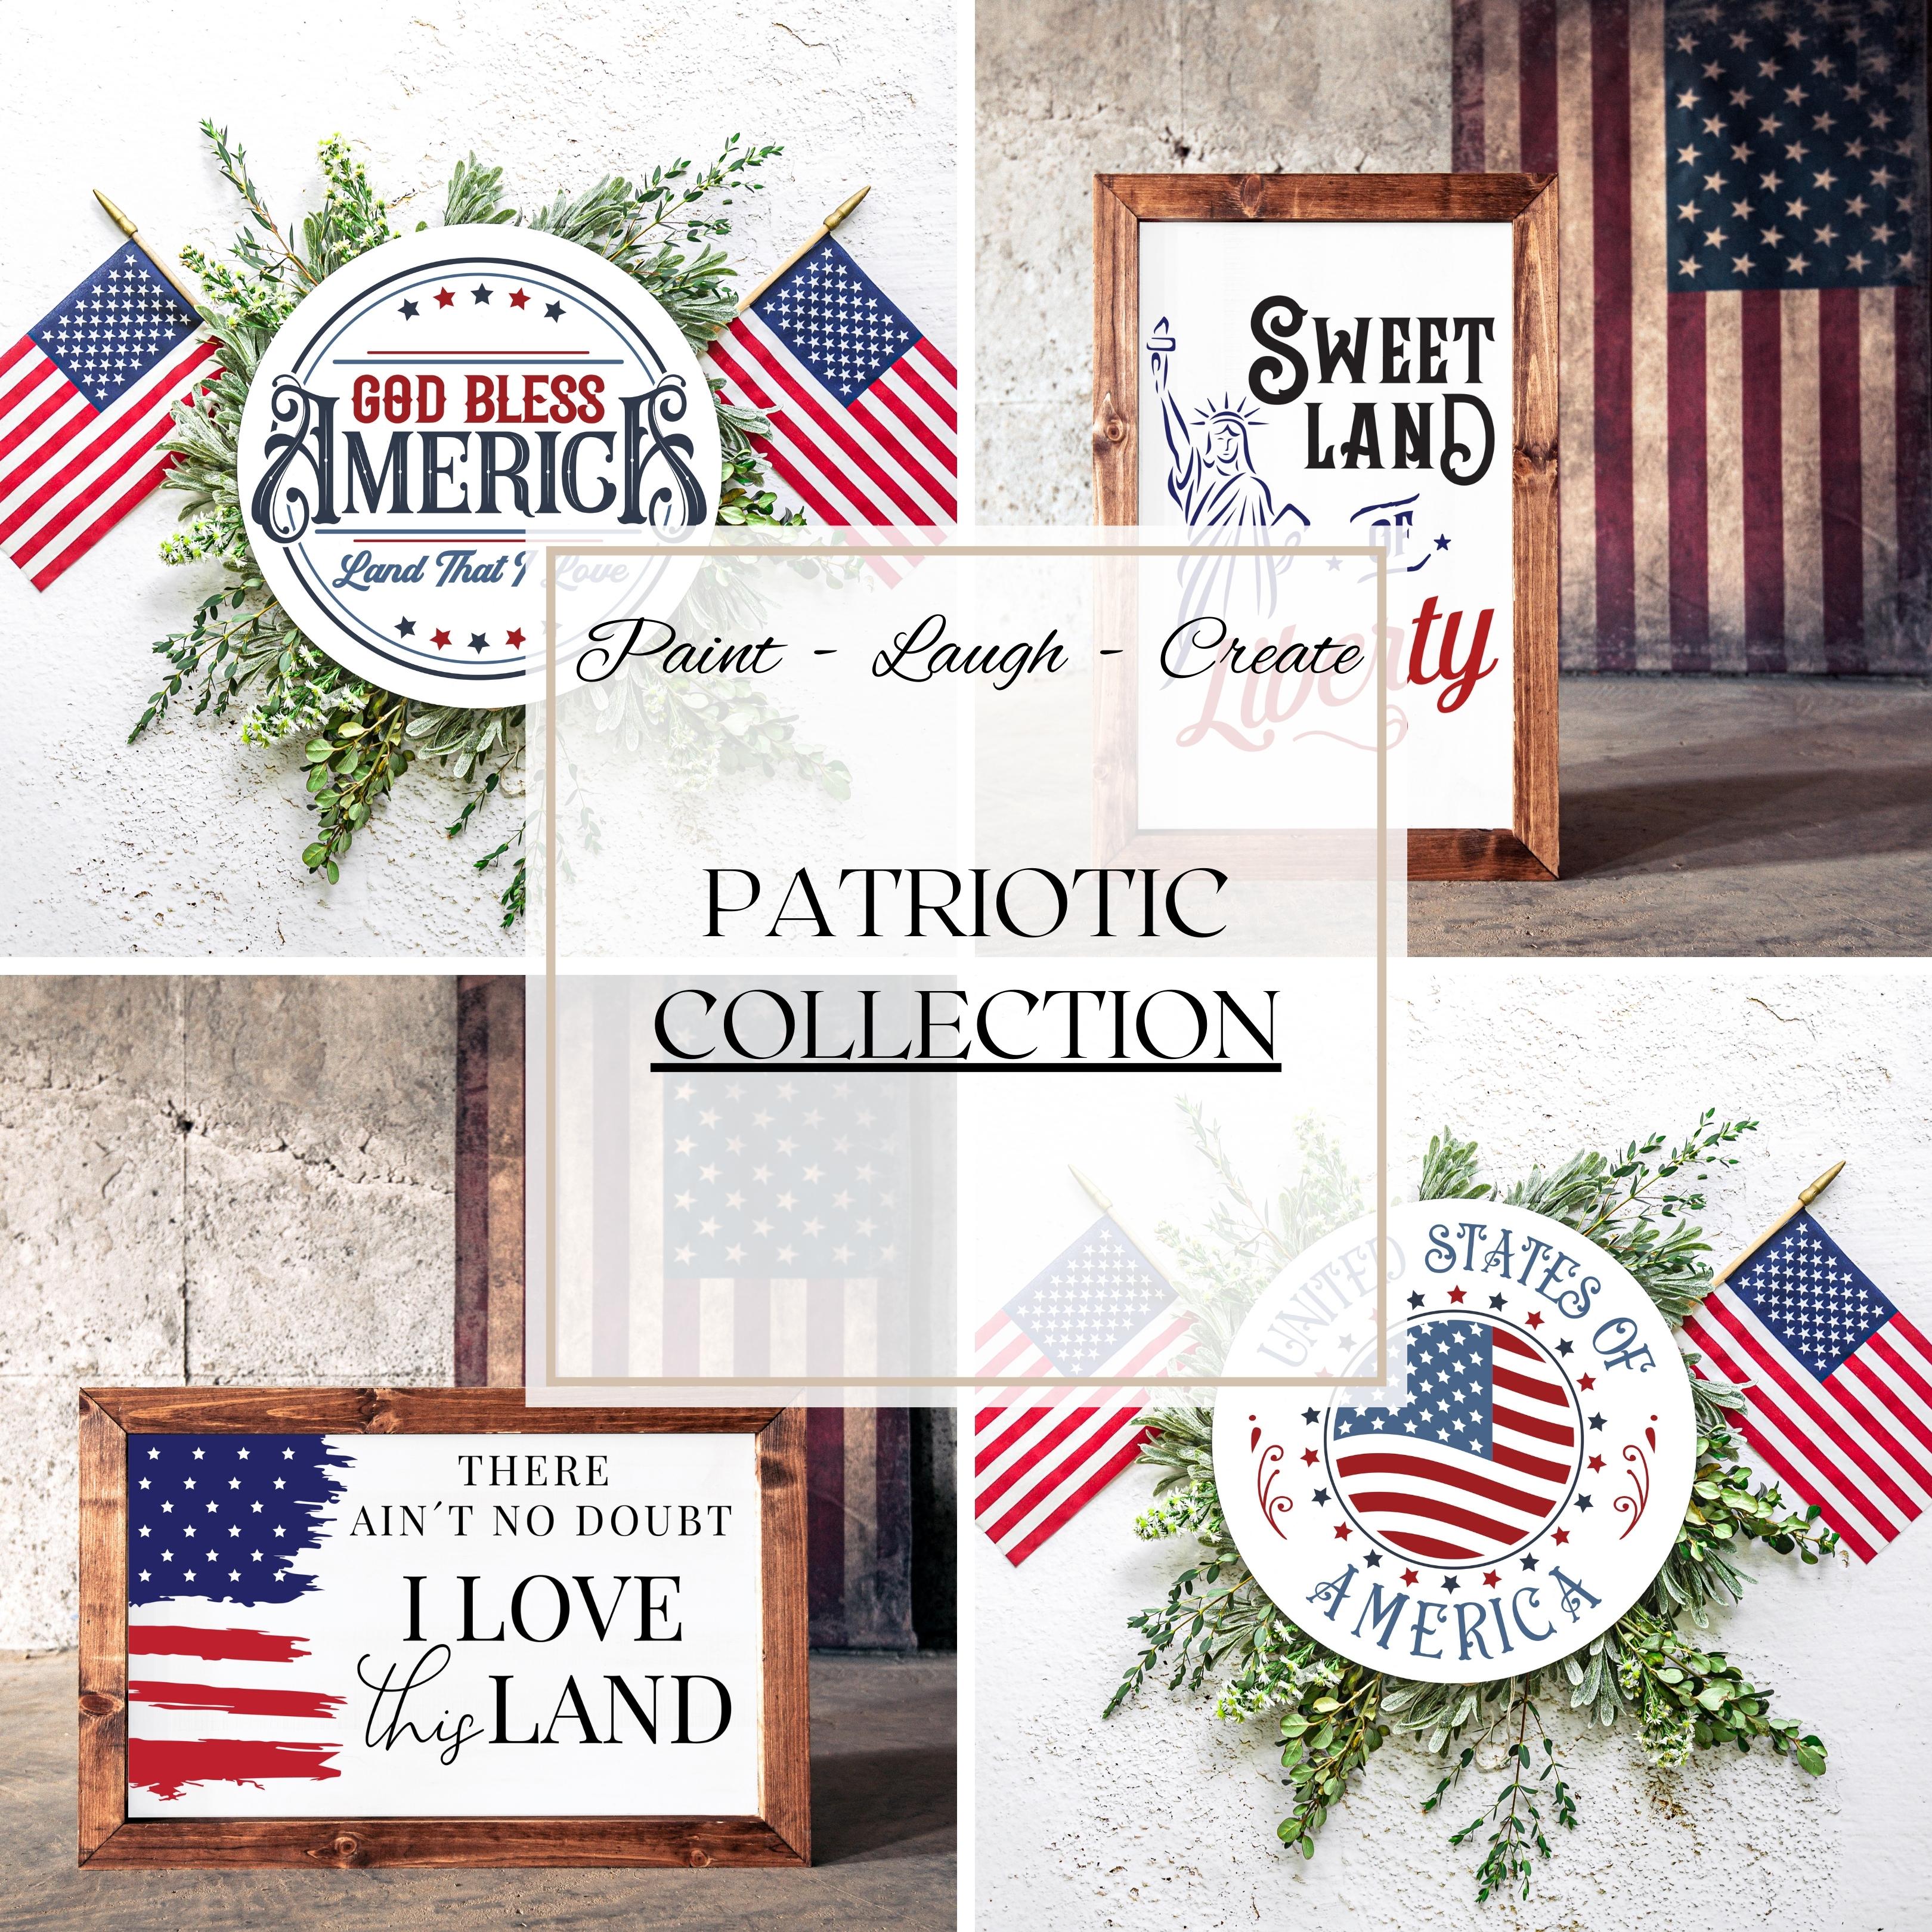 THE PATRIOTIC COLLECTION